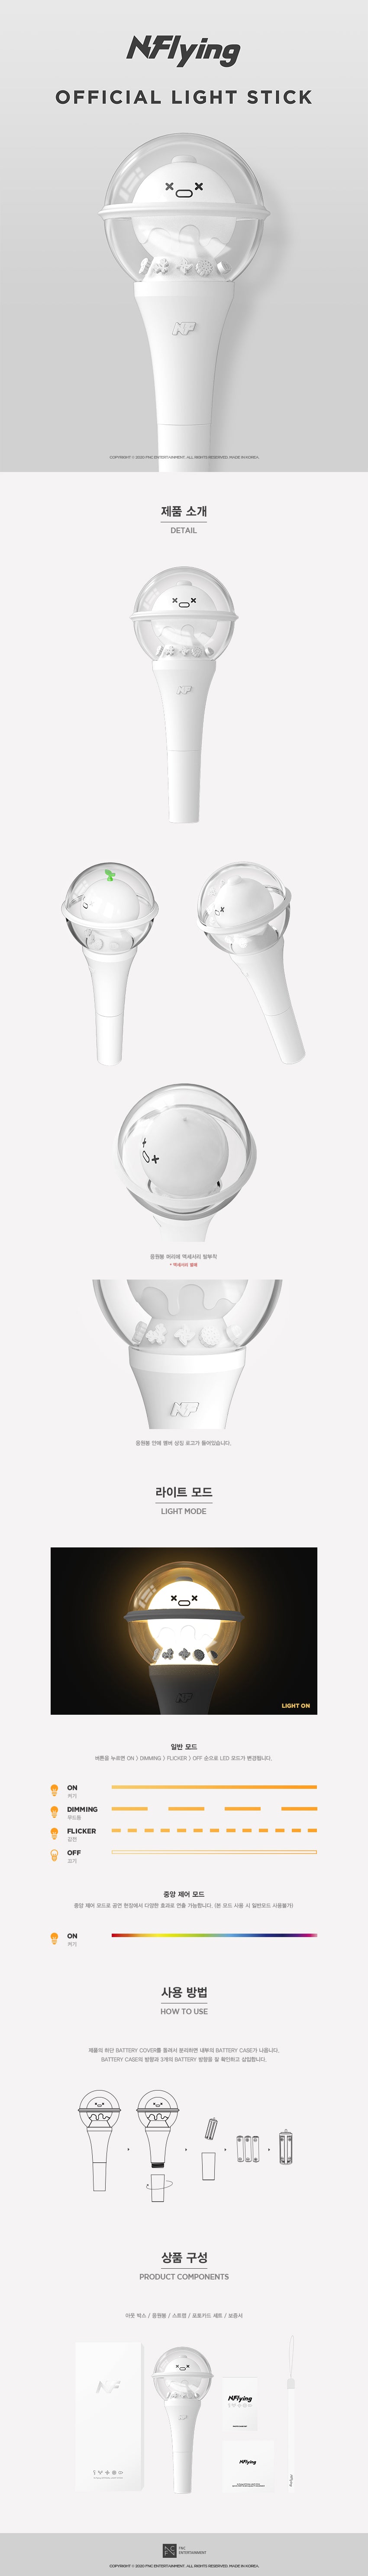 N.FLYING OFFICIAL LIGHT STICK DETAIL PAGE